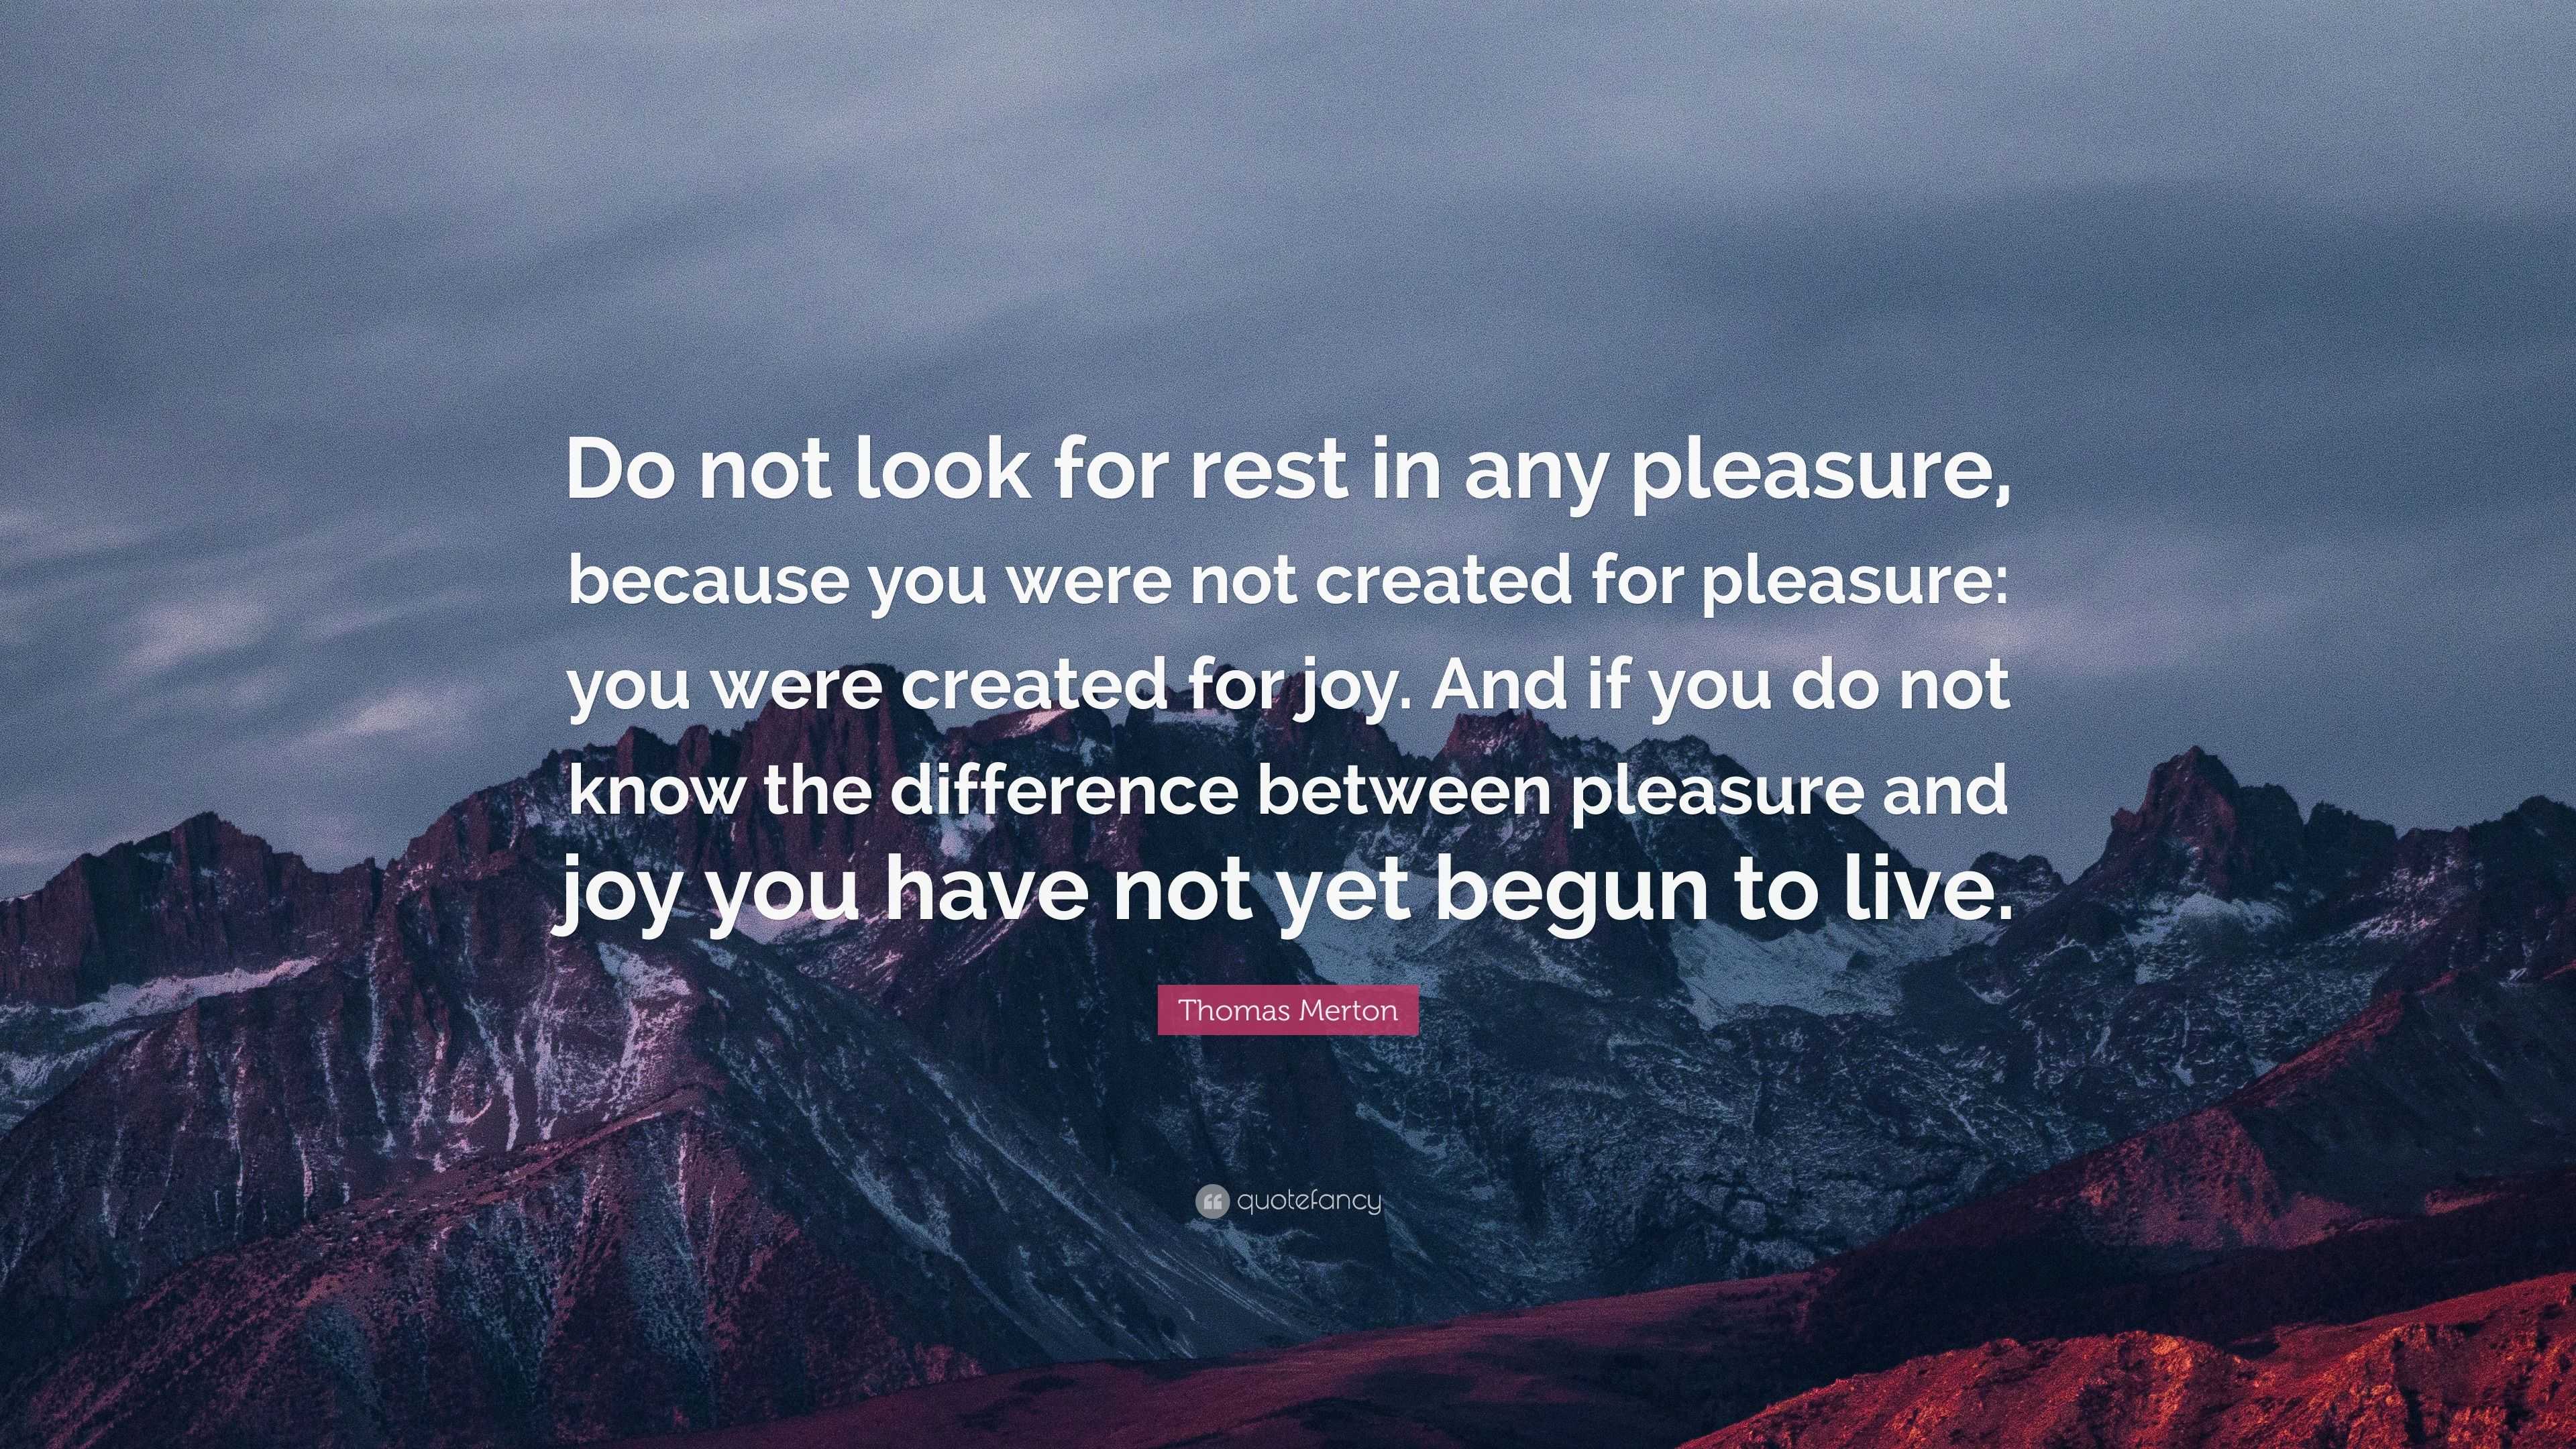 Thomas Merton Quote: “Do not look for rest in any pleasure, because you ...